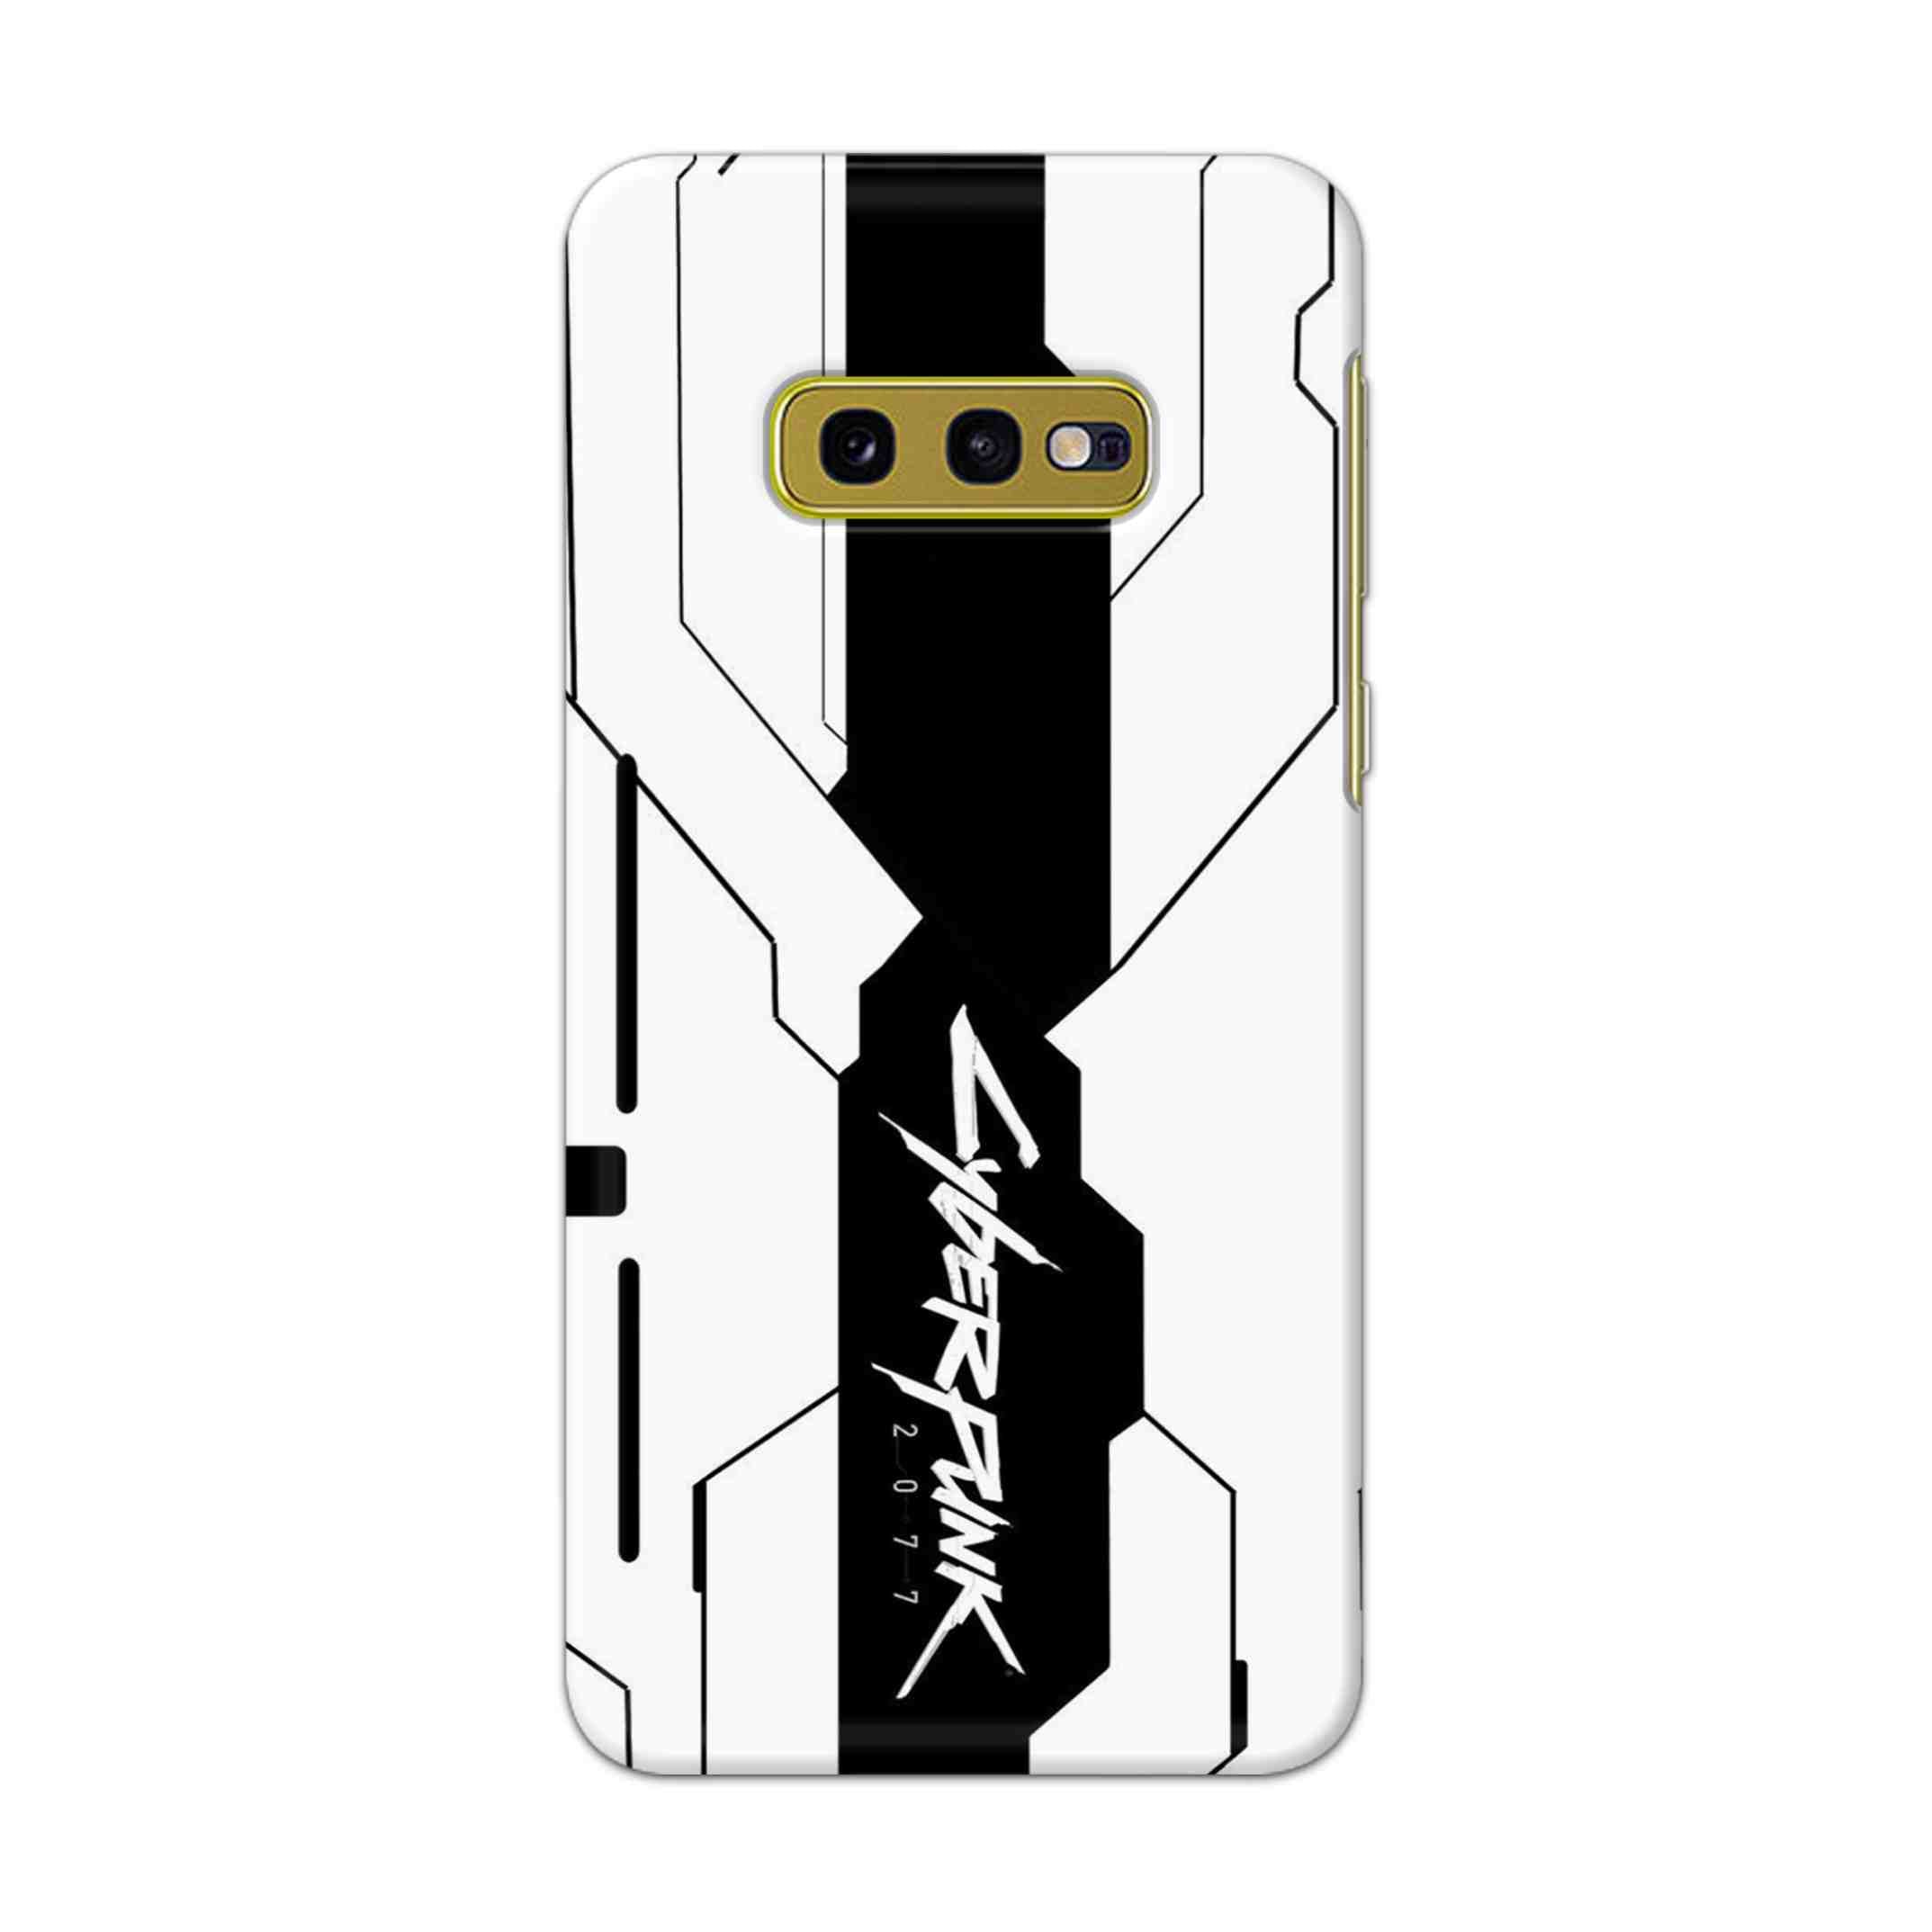 Buy Cyberpunk 2077 Hard Back Mobile Phone Case Cover For Samsung Galaxy S10e Online